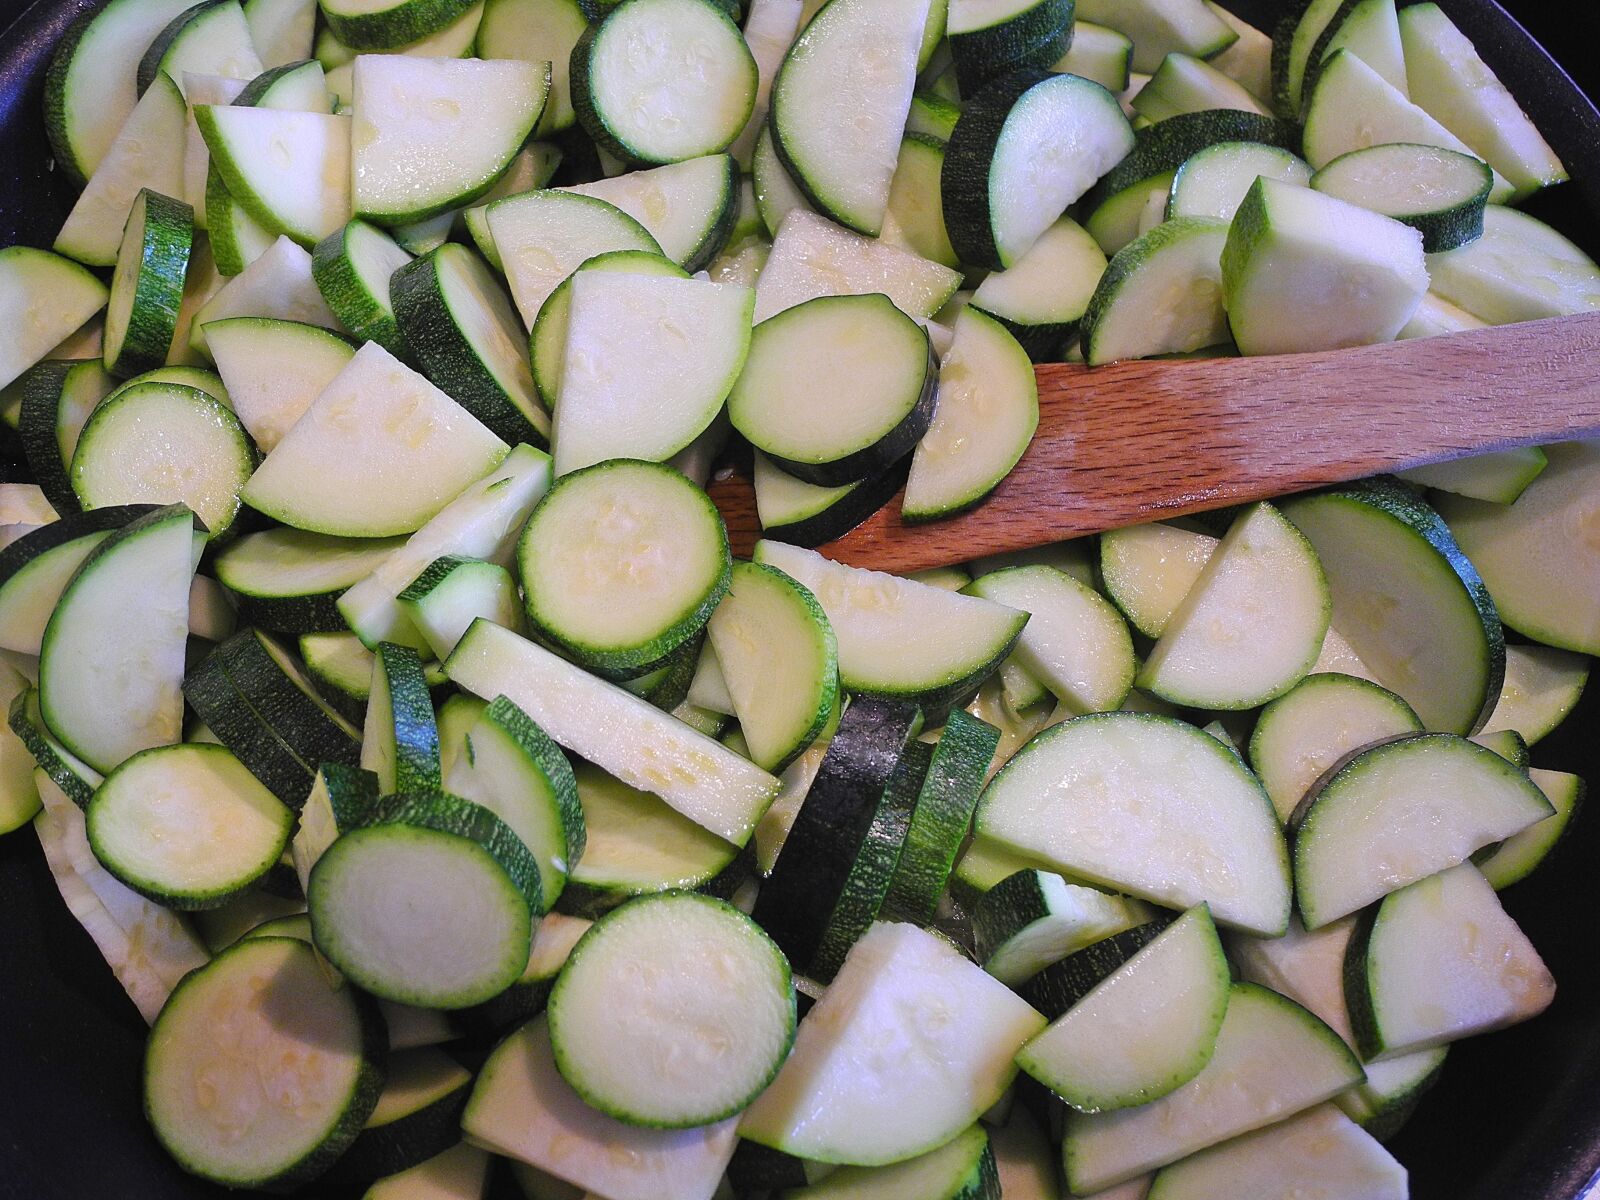 Nikon Coolpix P7000 sample photo. Zucchini, vegetables, cooking photography